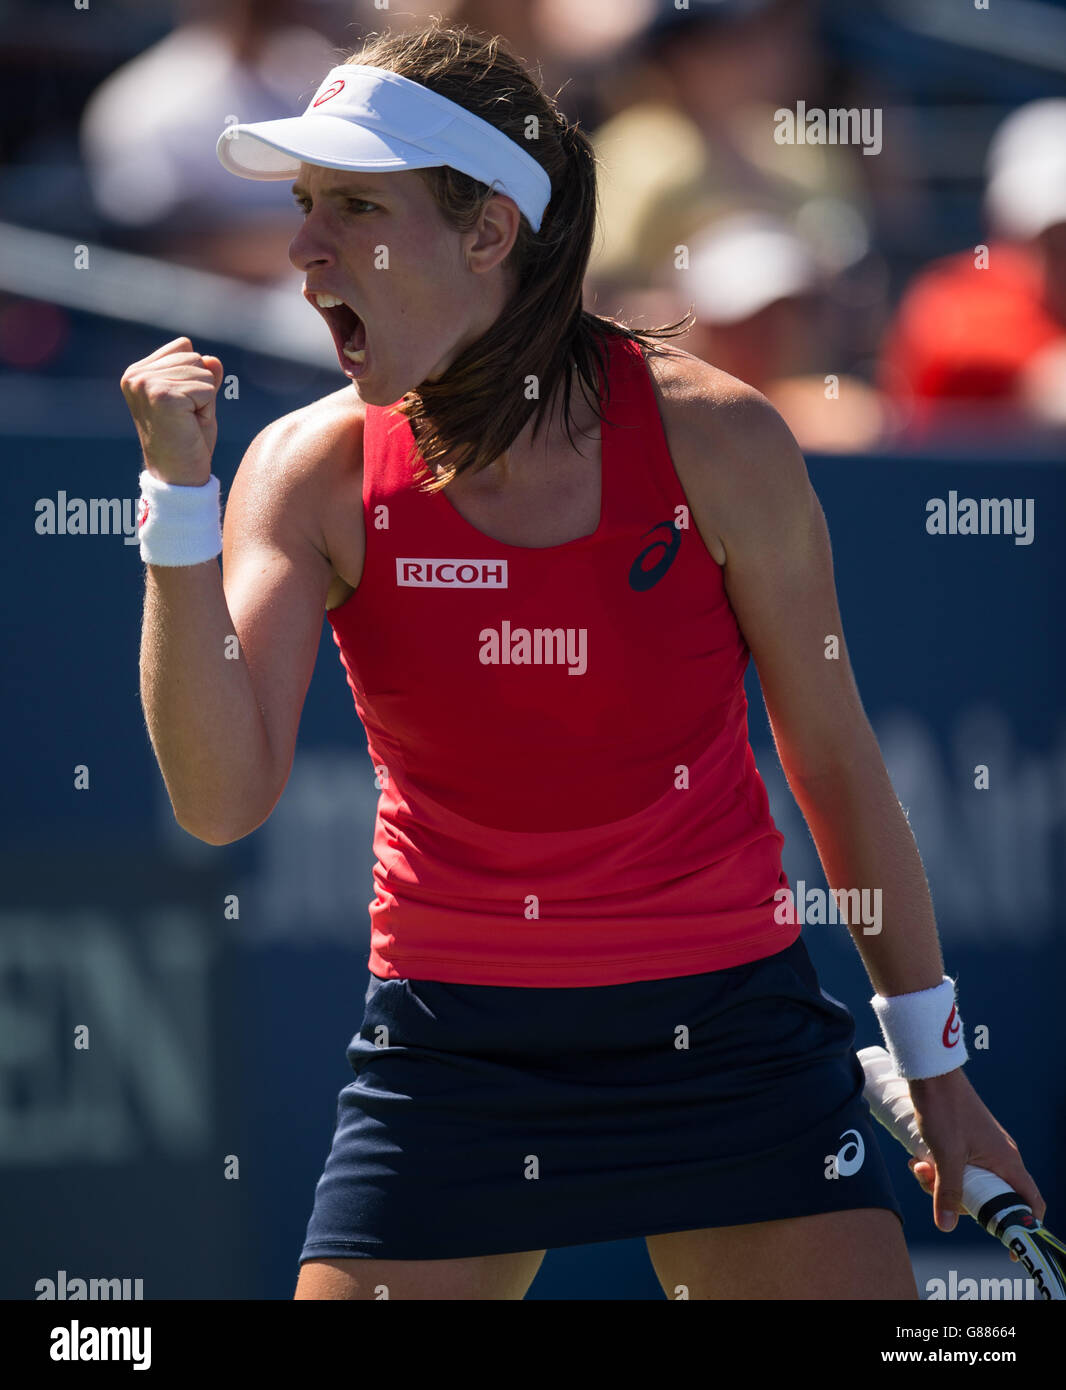 s singles match against Andrea Petkovic on day six of the US Open at the US Open at the Billie Jean King National Tennis Center on September 5, 2015 in New York, USA. Stock Photo